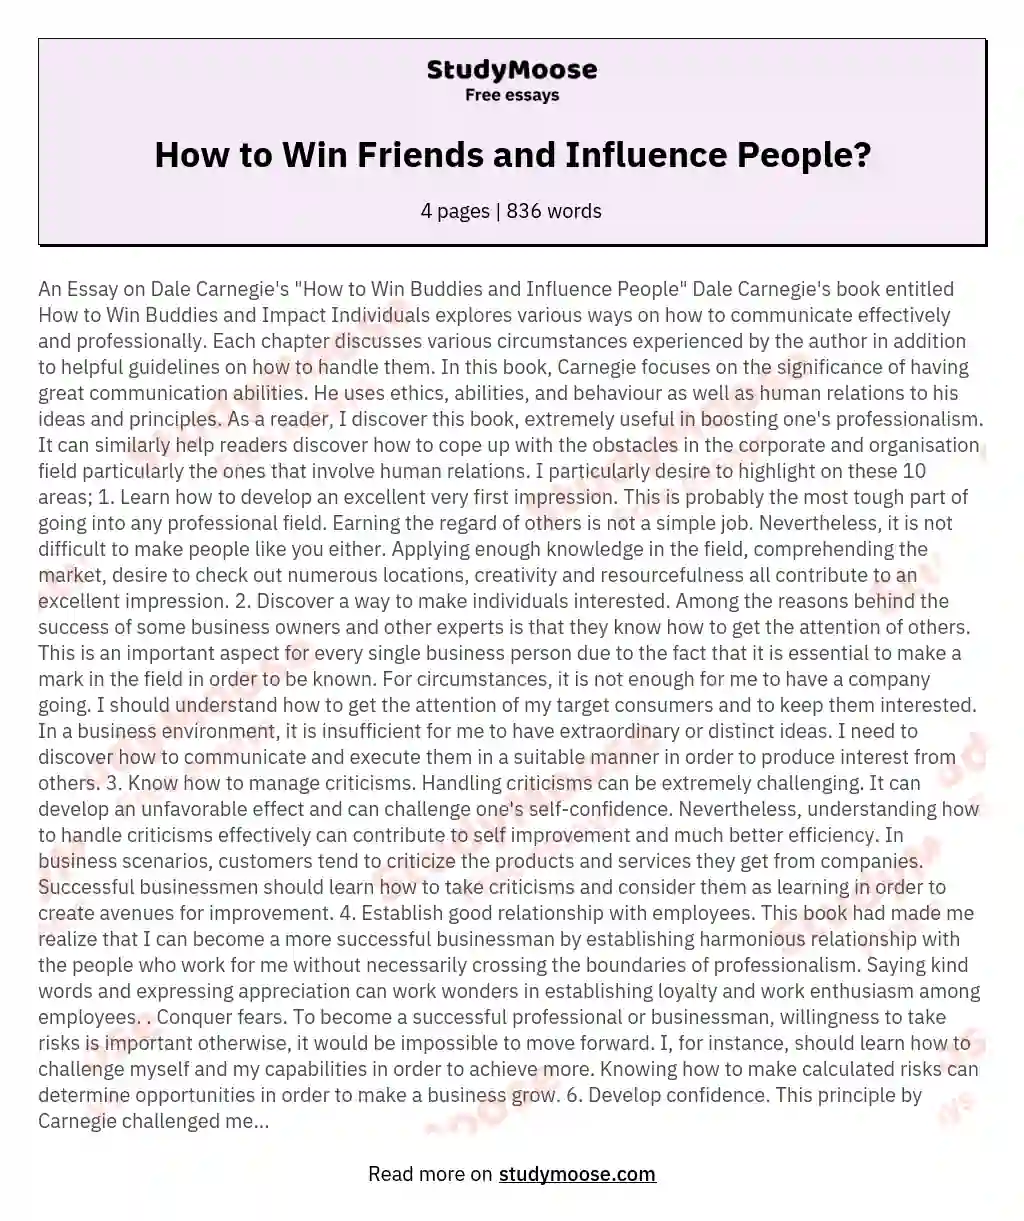 How to Win Friends and Influence People?